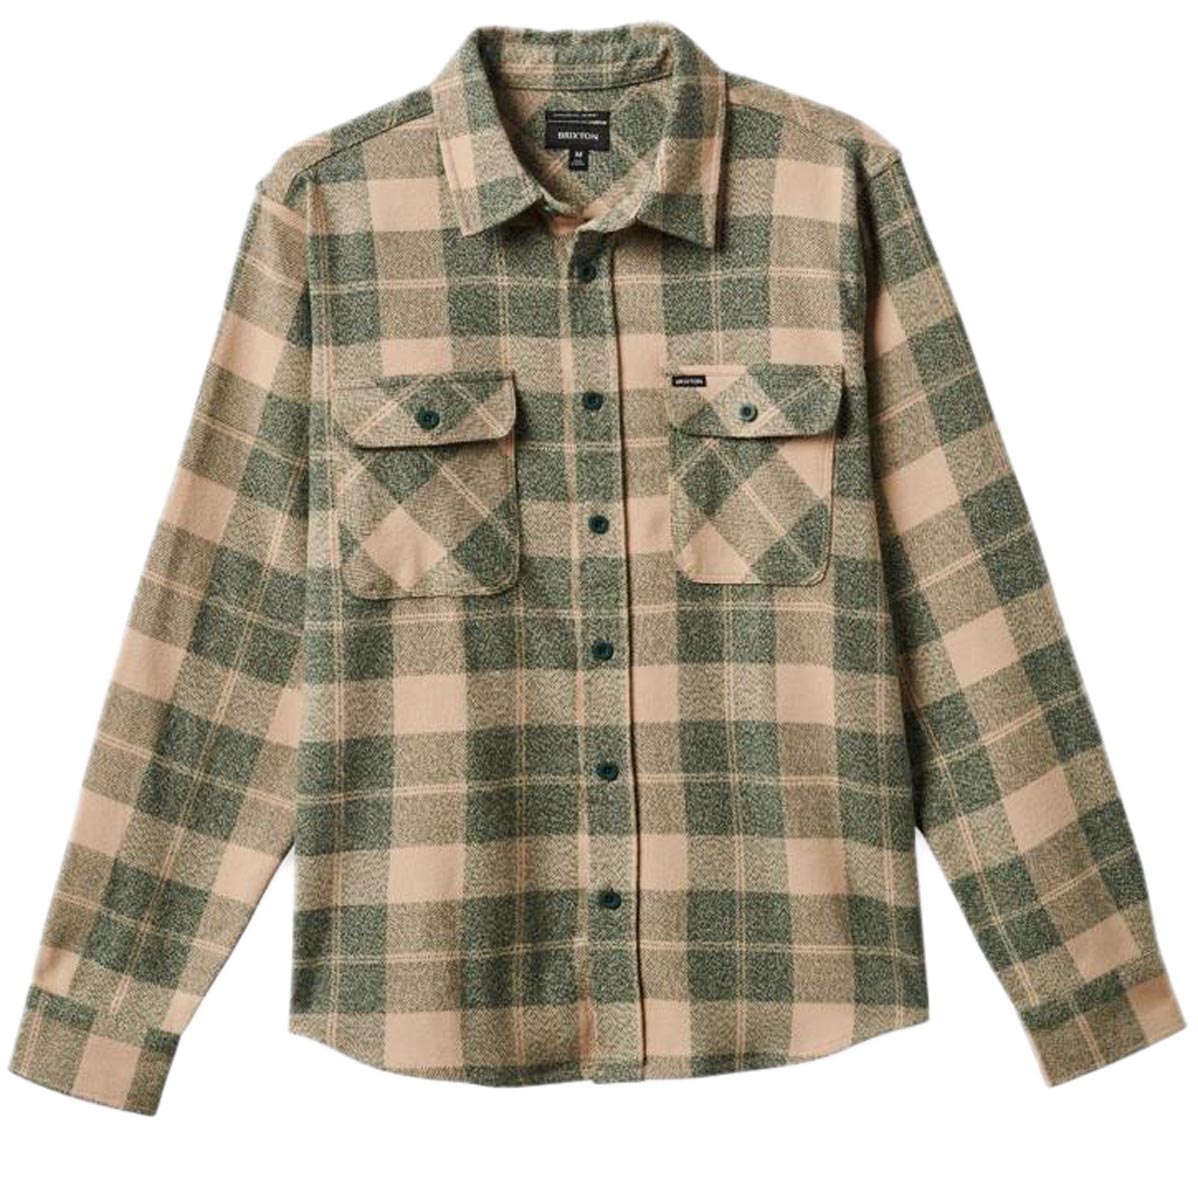 Brixton Bowery Stretch Water Resistant Flannel Shirt - Trekking Green/Oatmilk image 3